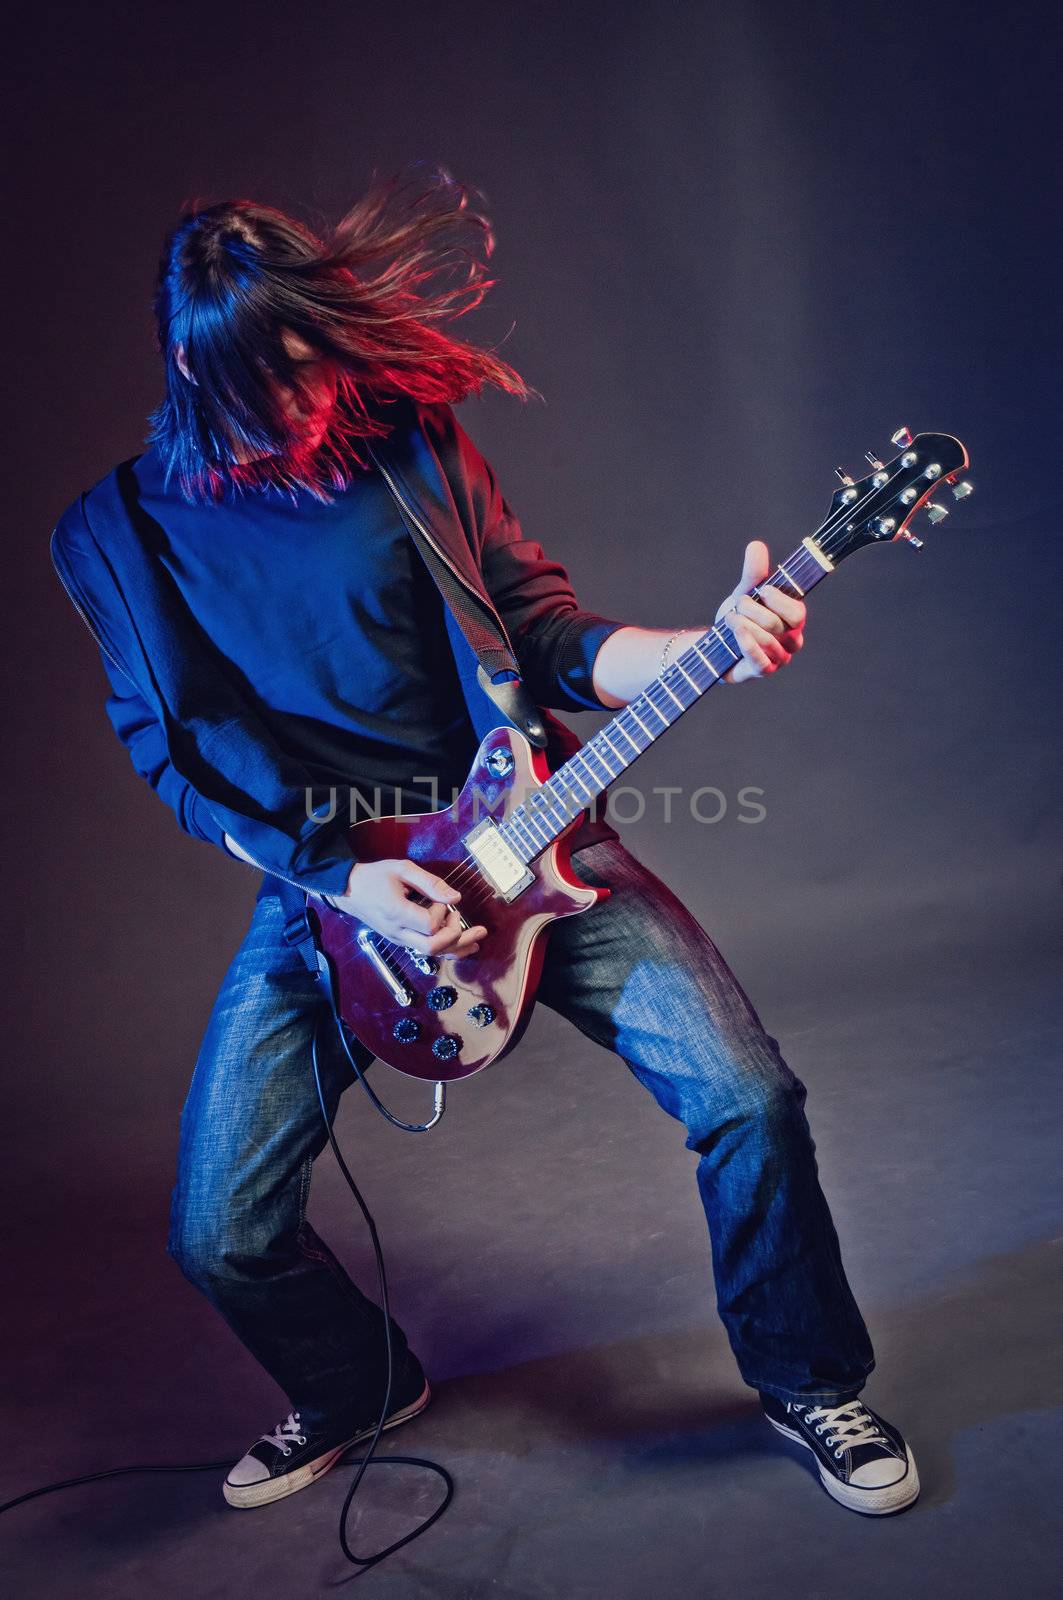 Rock-star perfoming loud music on red electric guitar